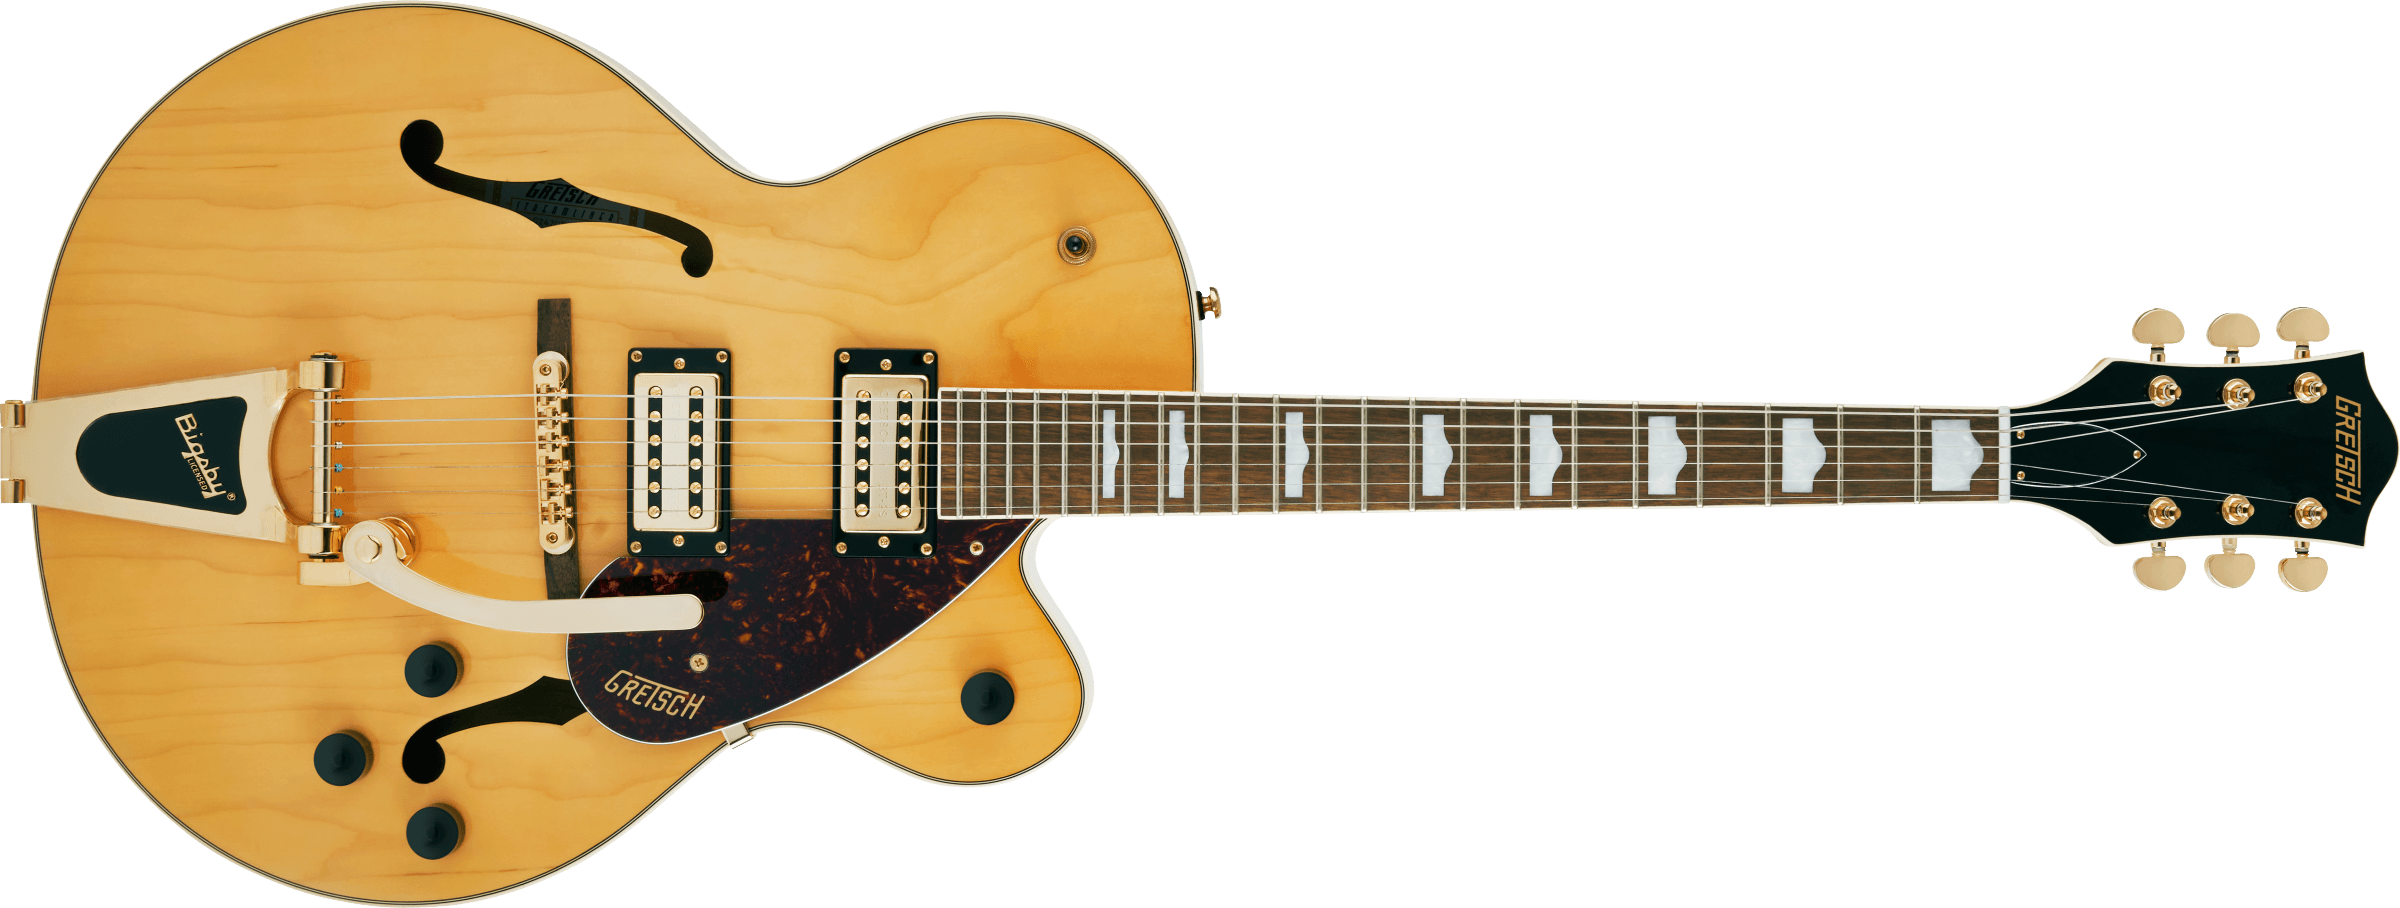 G2410TG Streamliner™ Hollow Body Single-Cut with Bigsby® and Gold Hardware, Laurel Fingerboard, Village Amber 2804800520